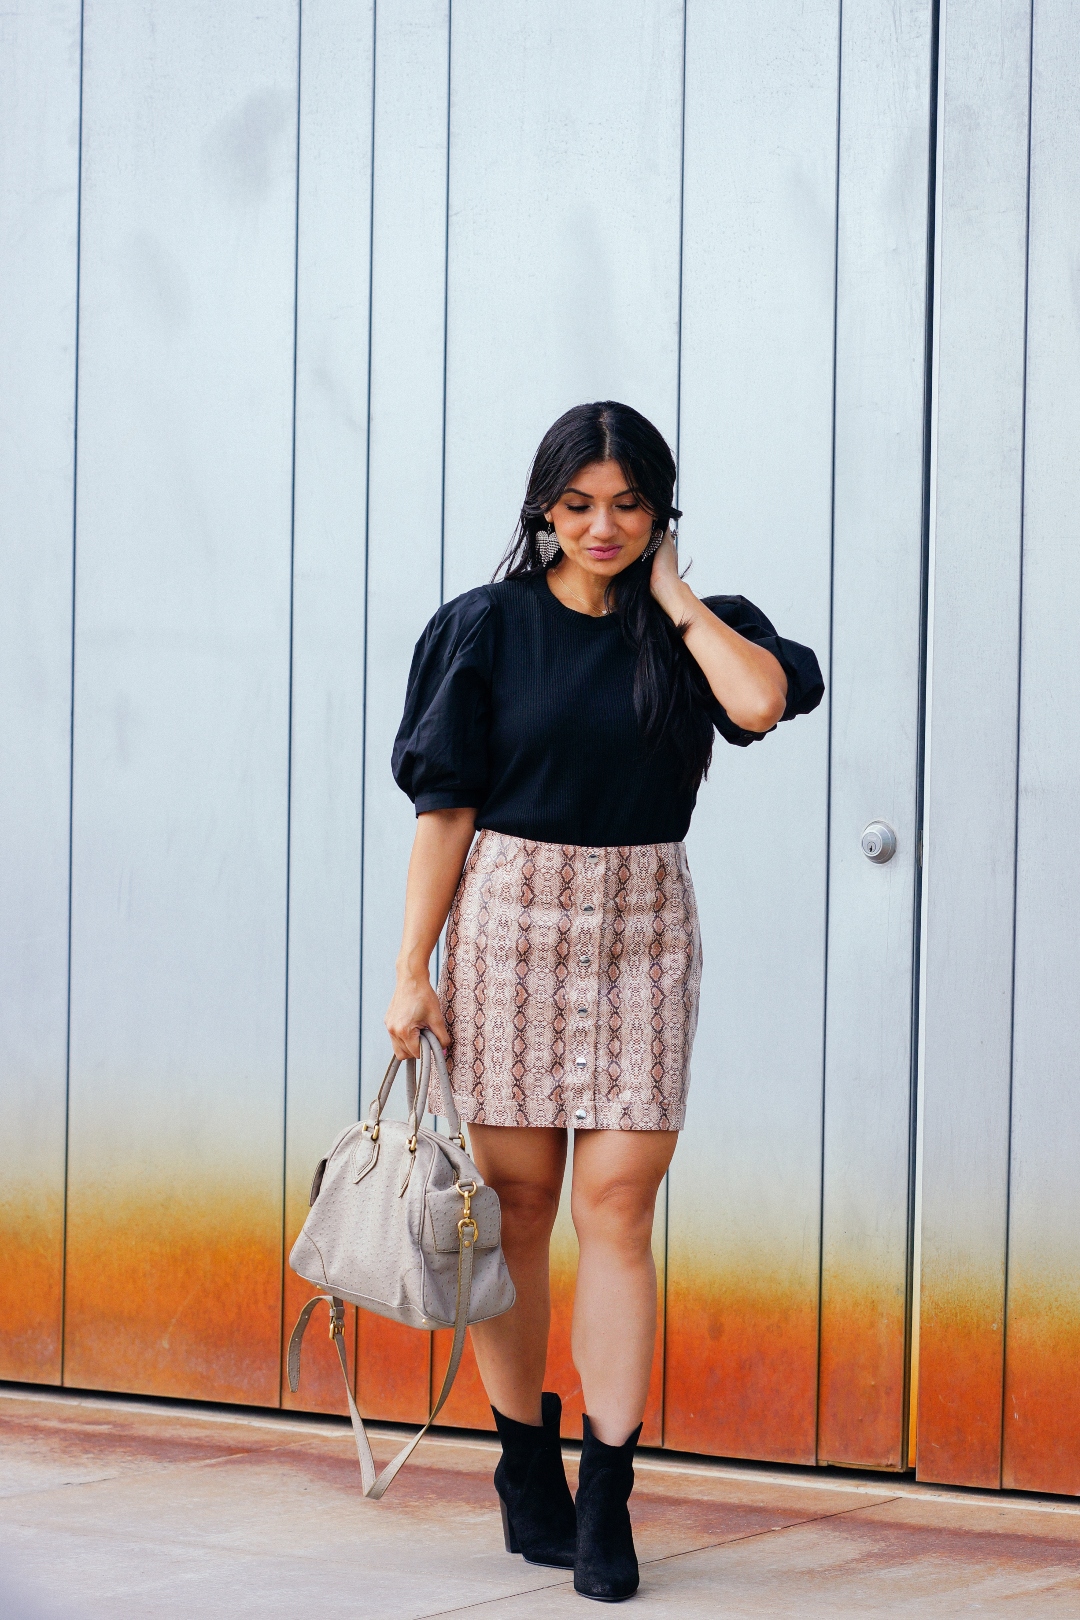 Curious about the snake print trend? Orange County Blogger Debbie Savage is sharing how to style the snake print trend effortlessly. See how here! 